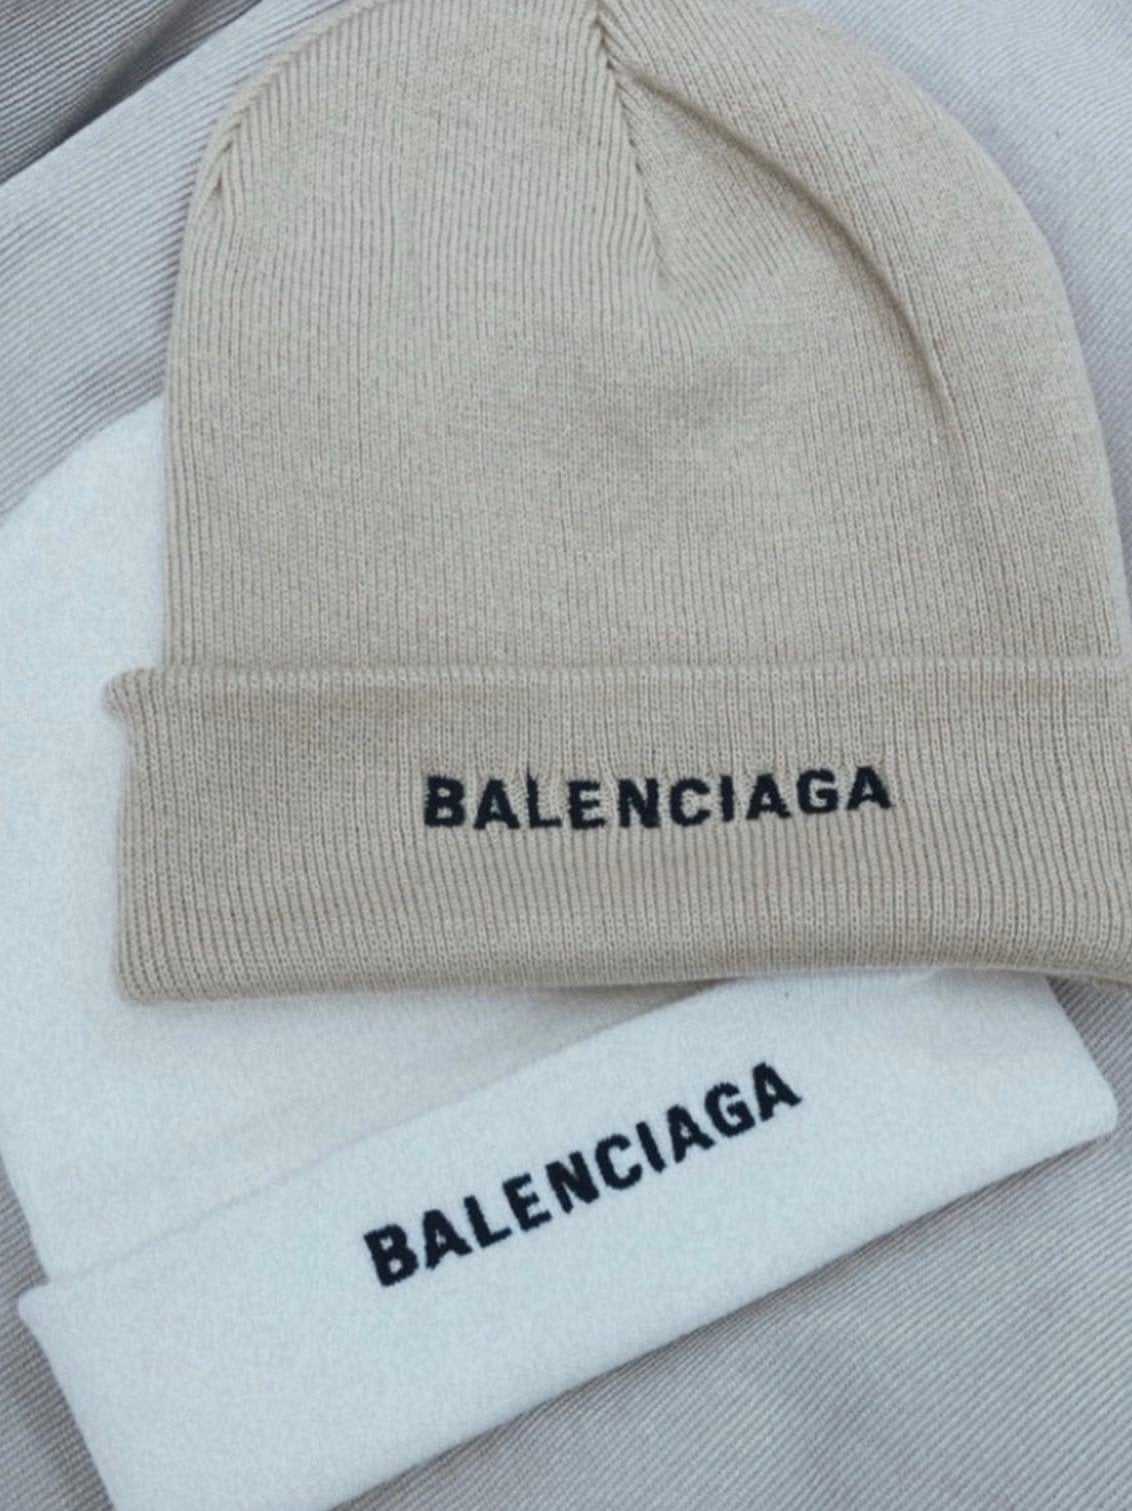 BB White Unisex Beanie accessories Out The Purse UK 